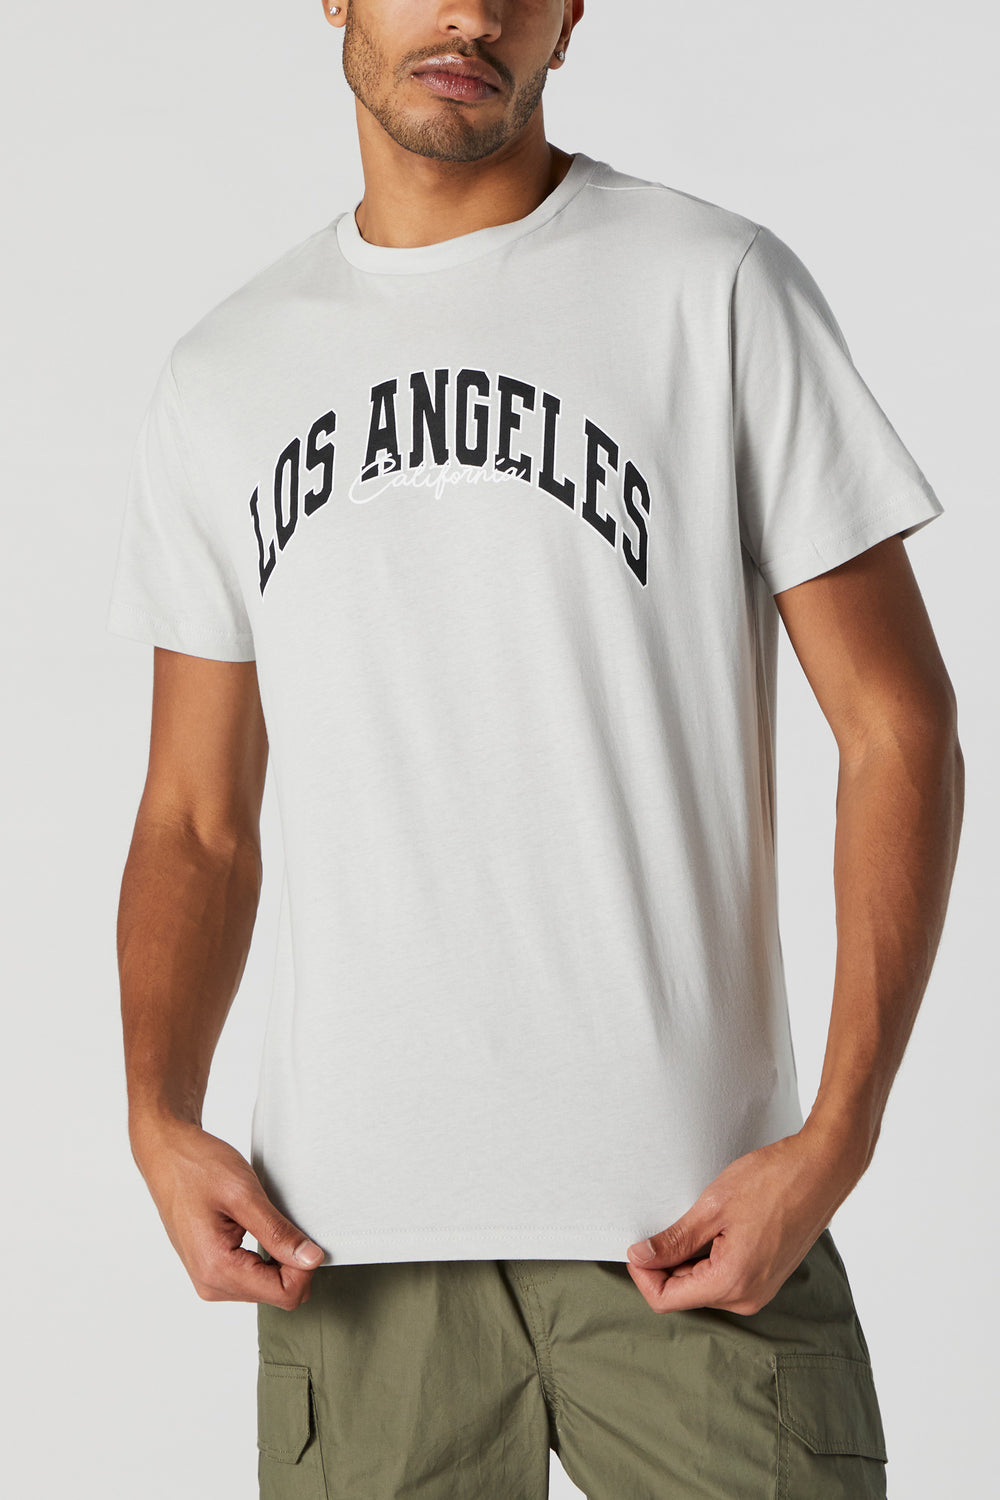 Los Angeles Graphic T-Shirt Los Angeles Graphic T-Shirt 2